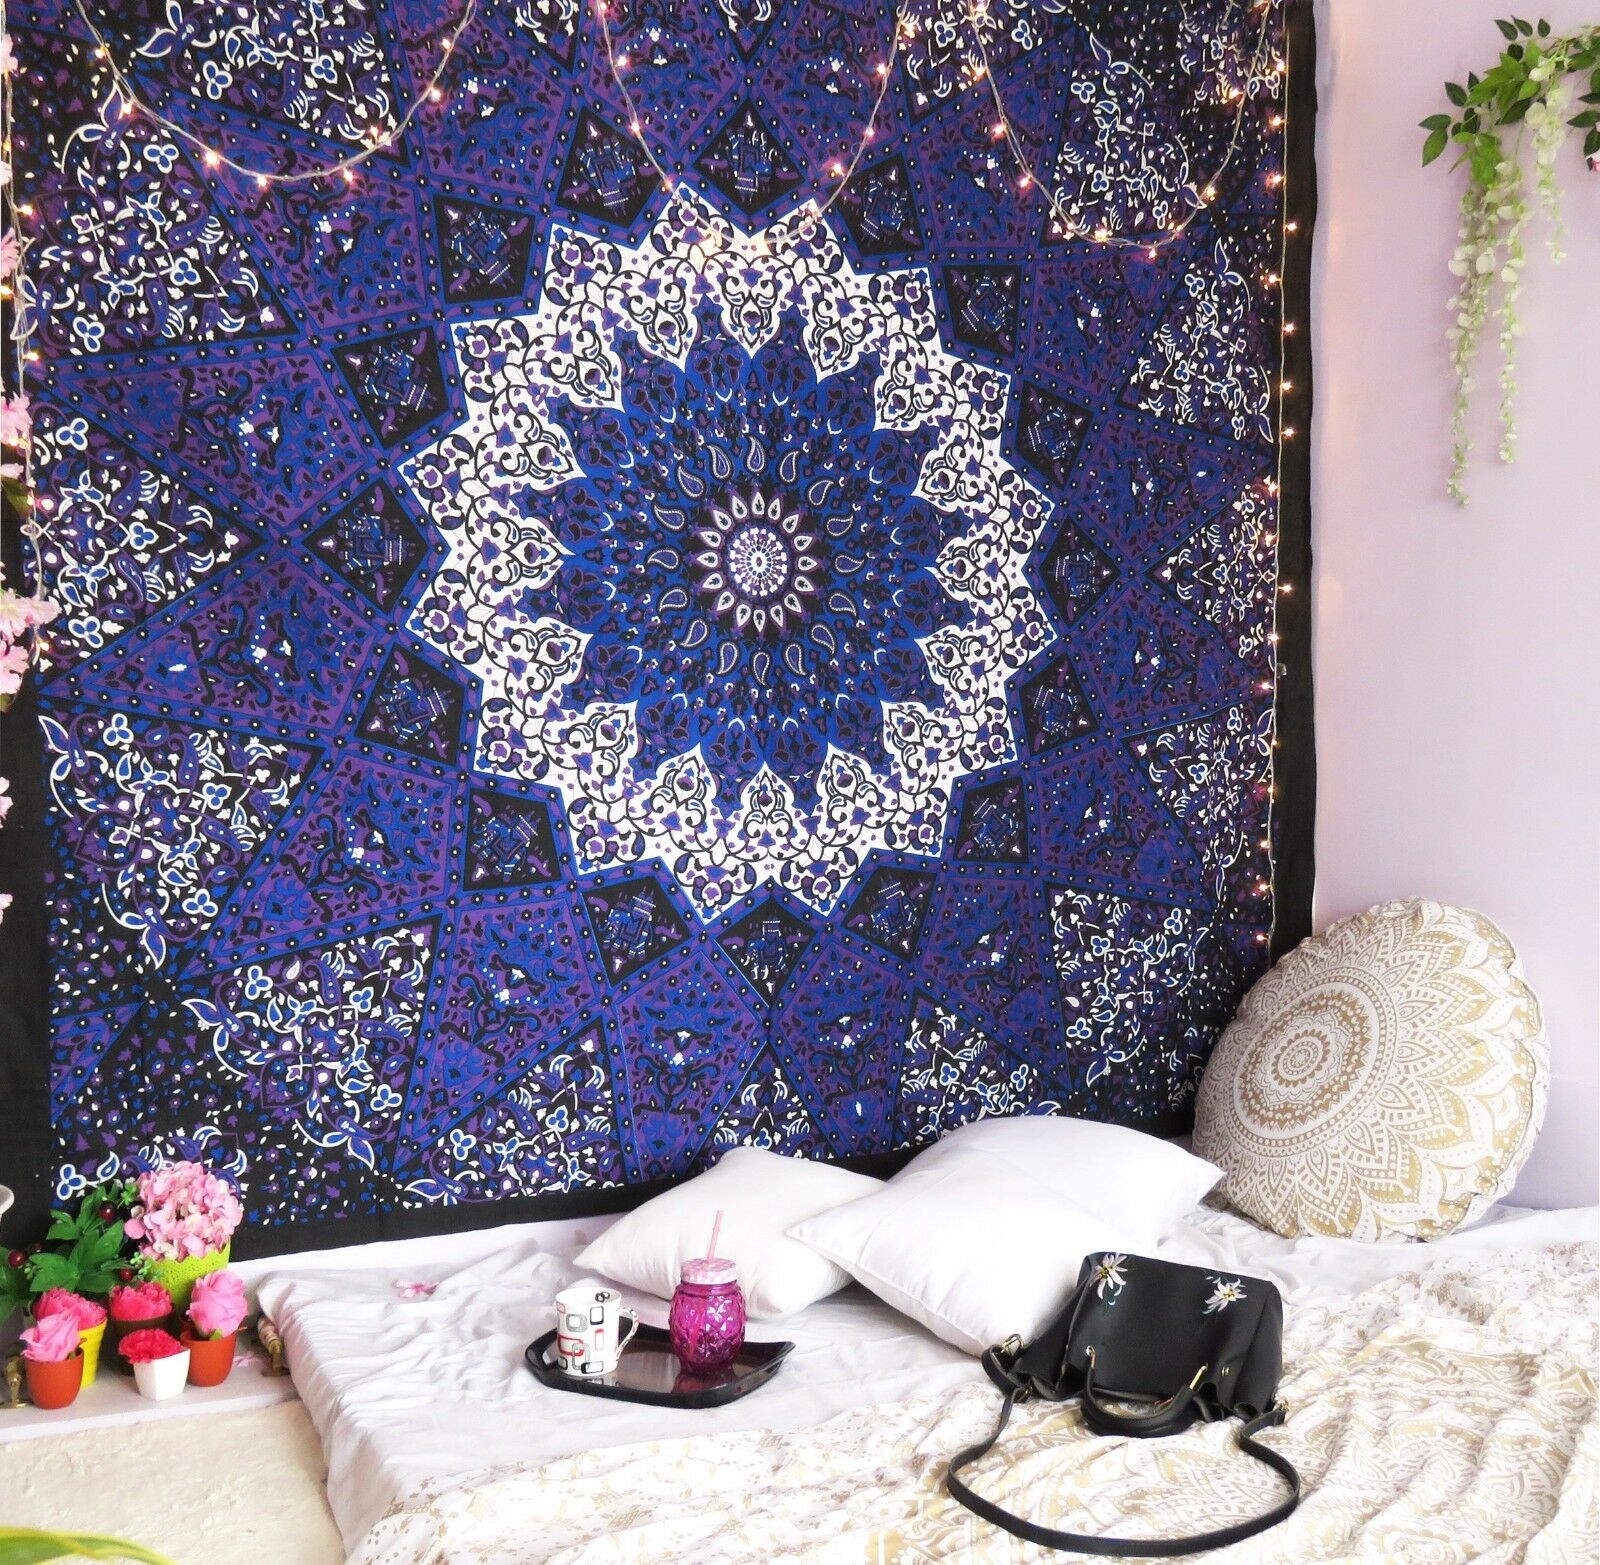 Wall Mandala Tapestry Indian Hanging Hippie Decor Bedspread Bohemian Throw Queen